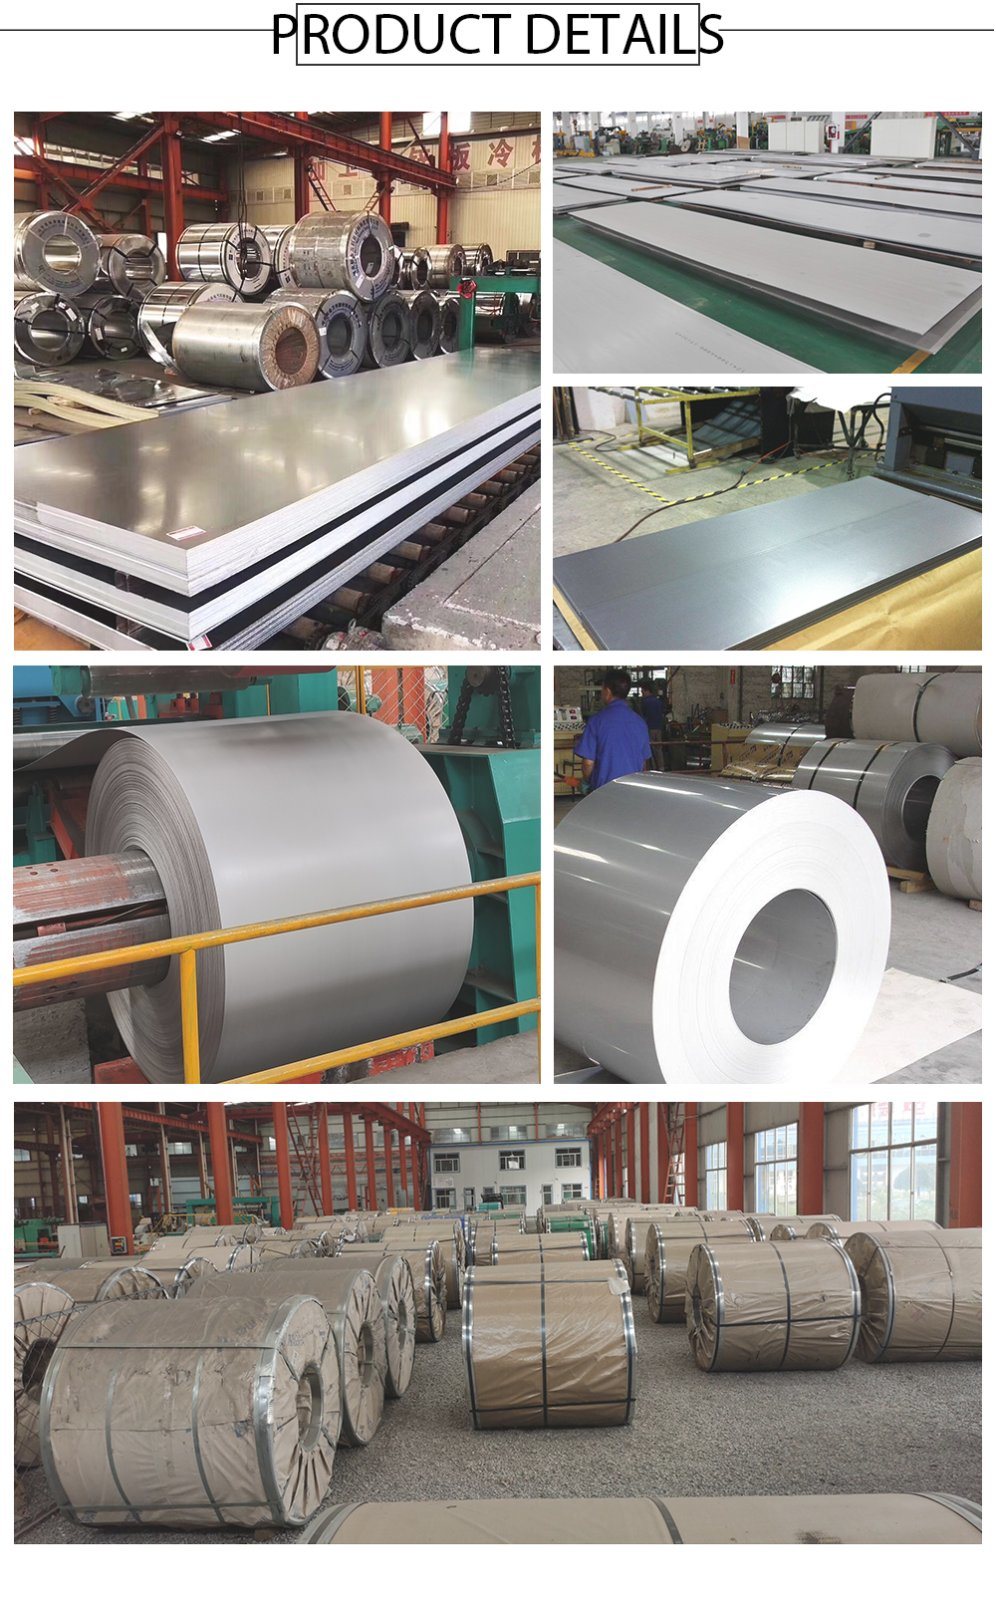 Best Quality 10mm Thickness ASTM A283 A36 Grc A285 Grade C ASTM A36 Cold Rolled/ Hot Rolled Ms Carbon/ASTM A240 304 316 Stainless/Galvanized Steel Sheet Price